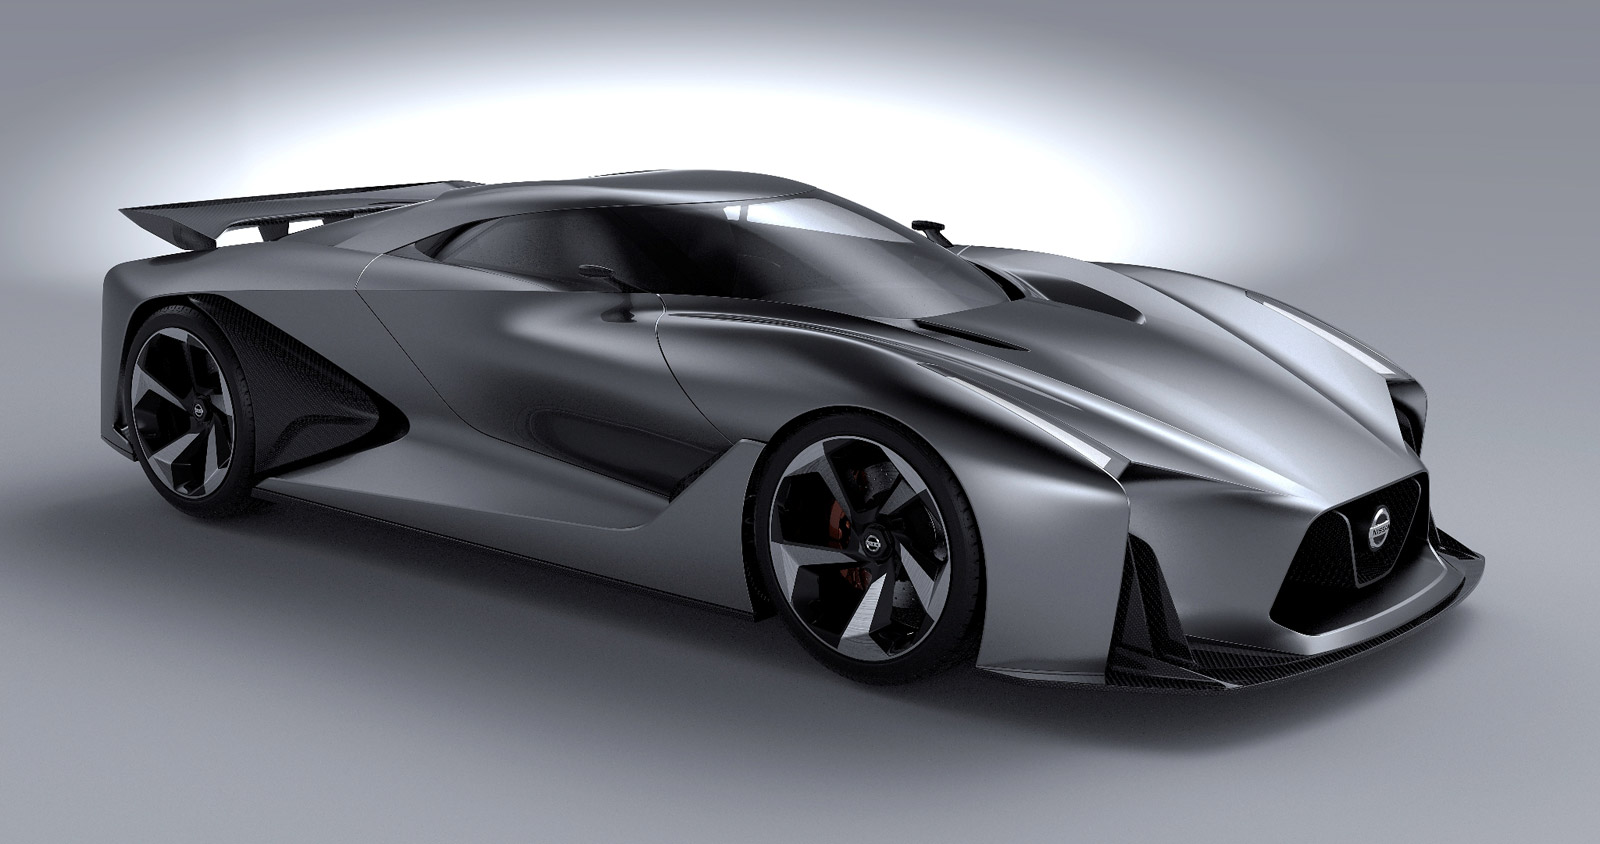 HQ Nissan Concept Wallpapers | File 172.6Kb